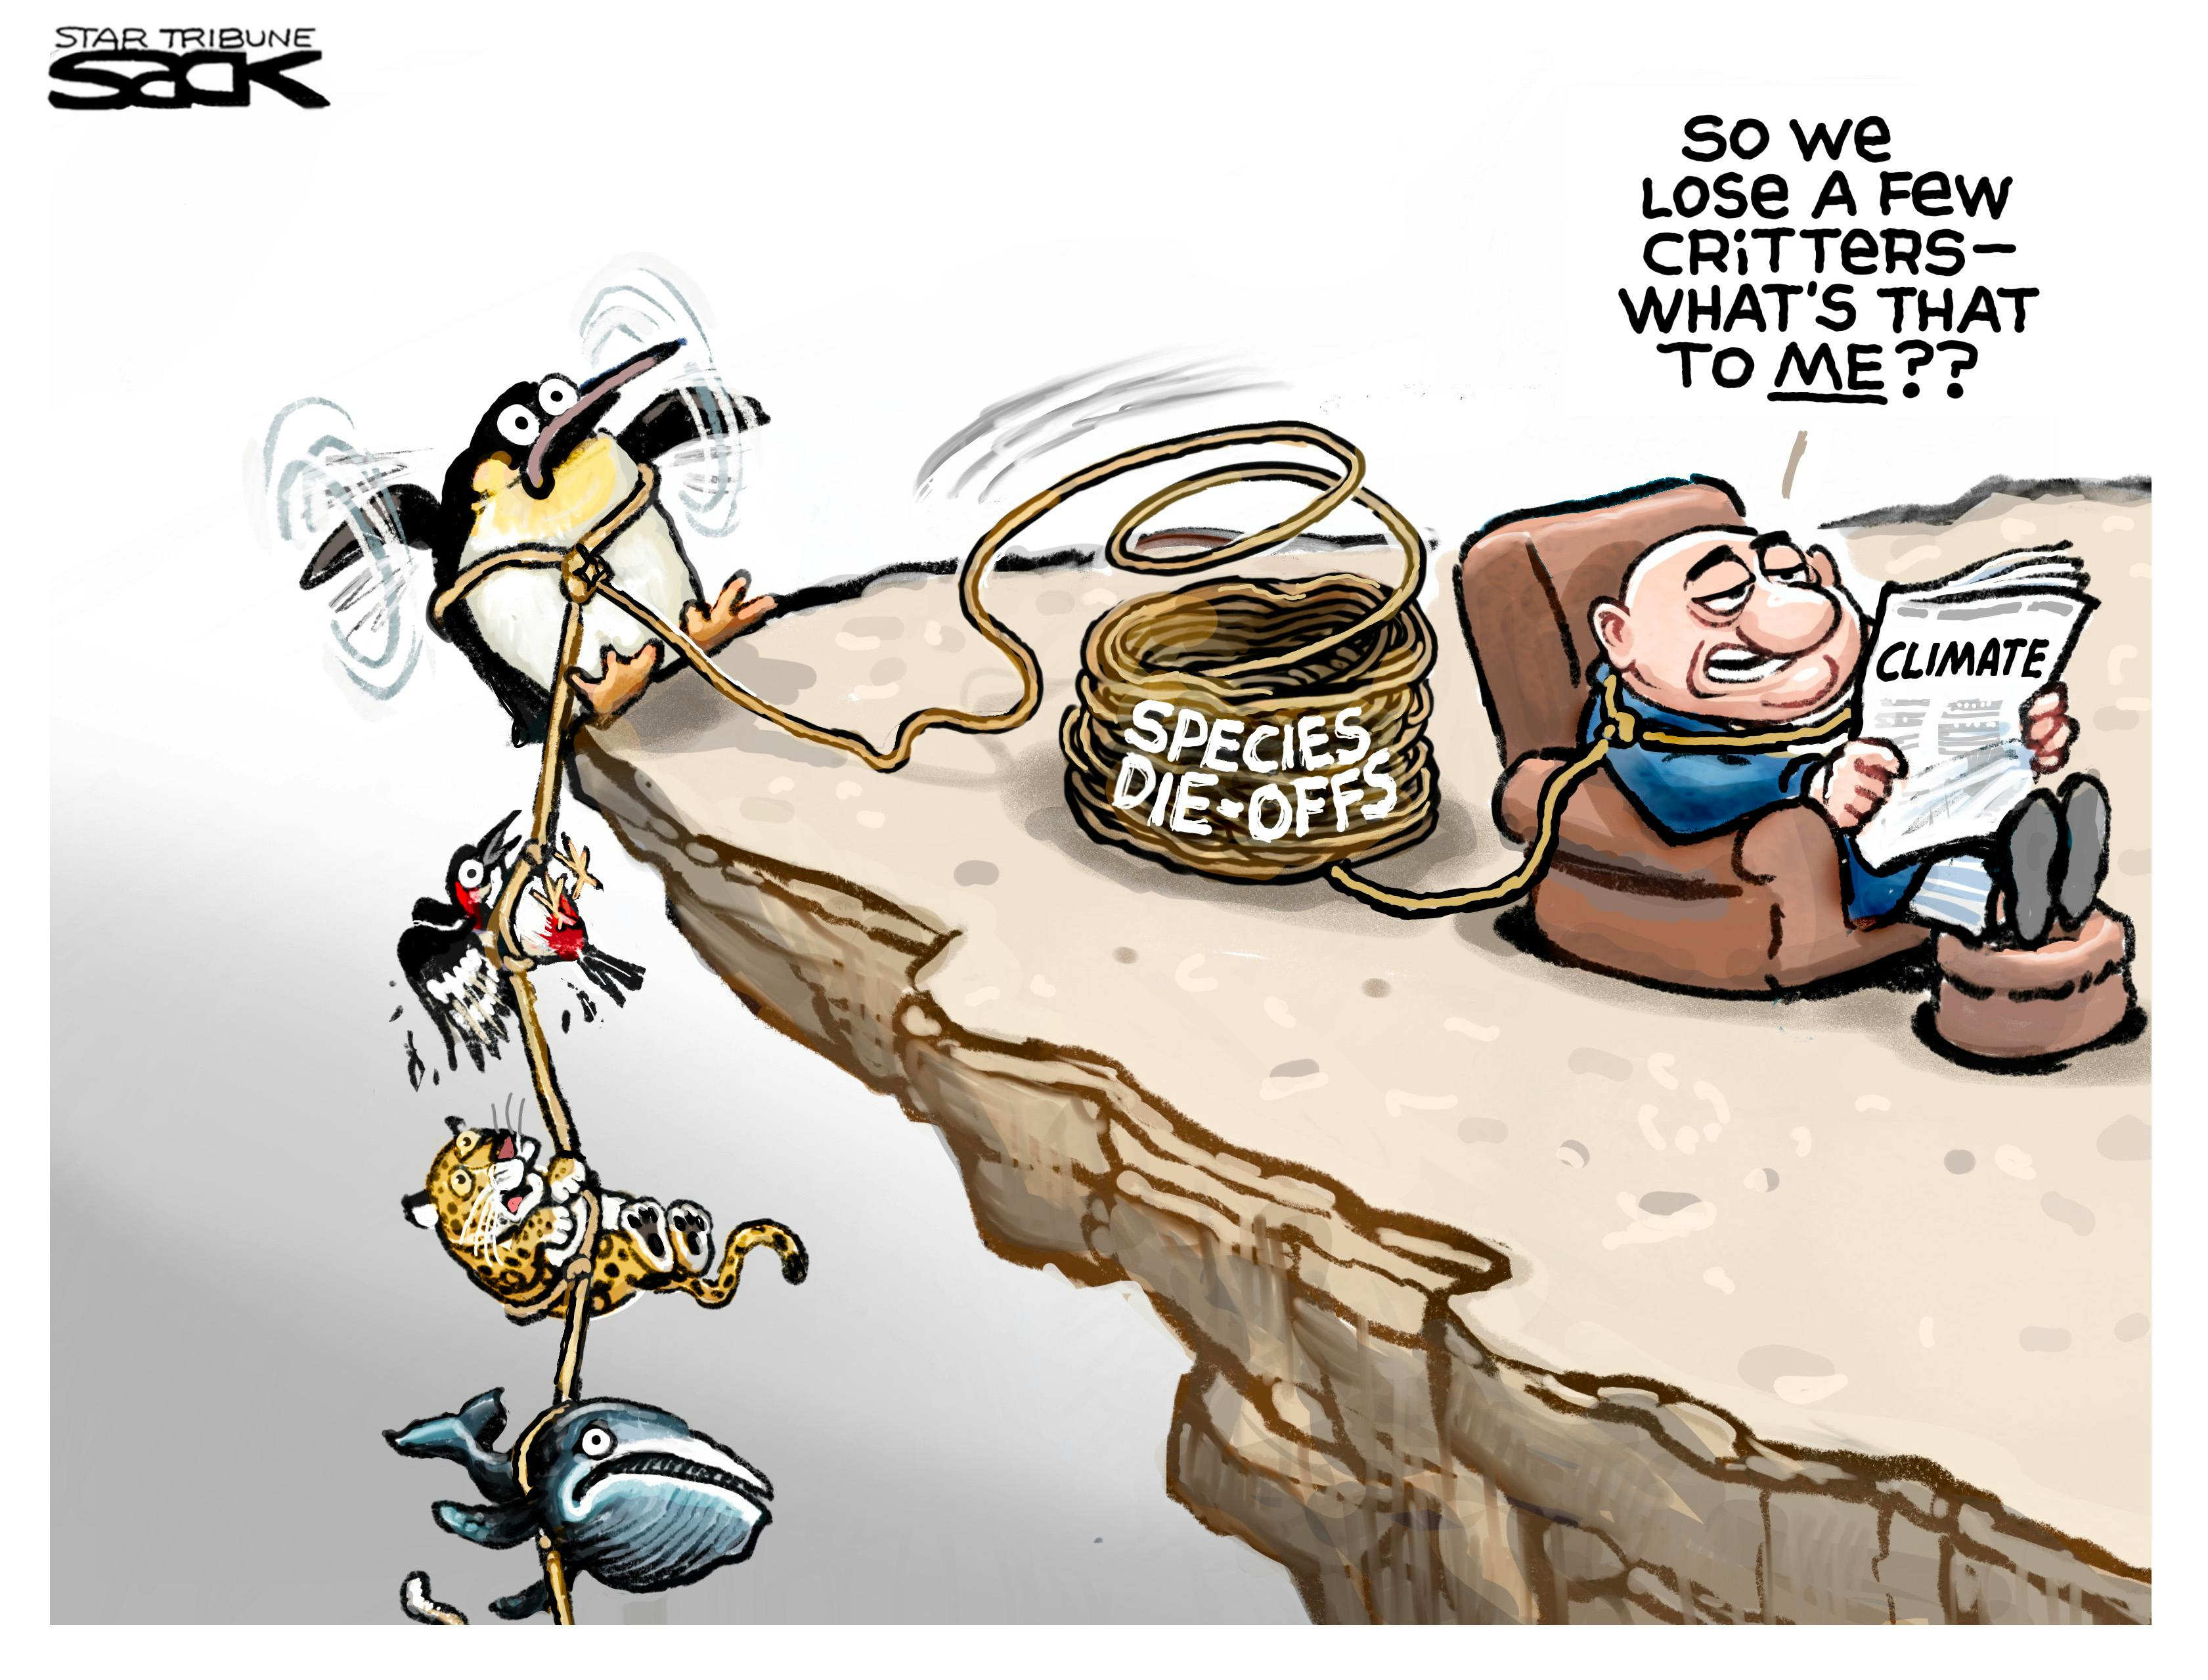 Sack cartoon: Over the edge on climate change